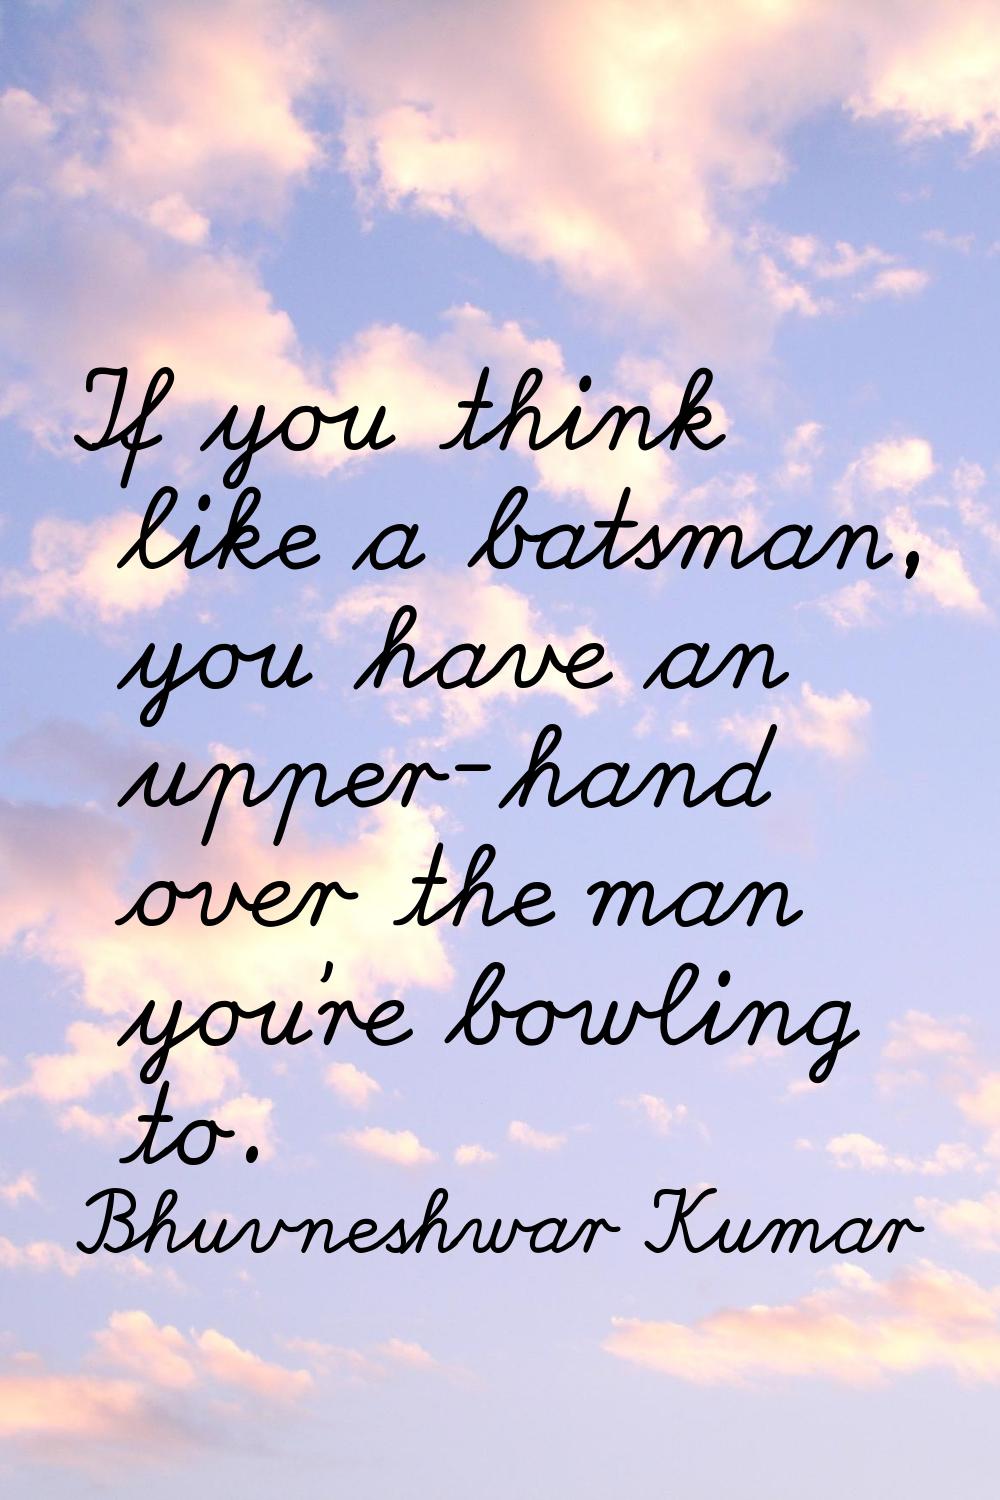 If you think like a batsman, you have an upper-hand over the man you're bowling to.